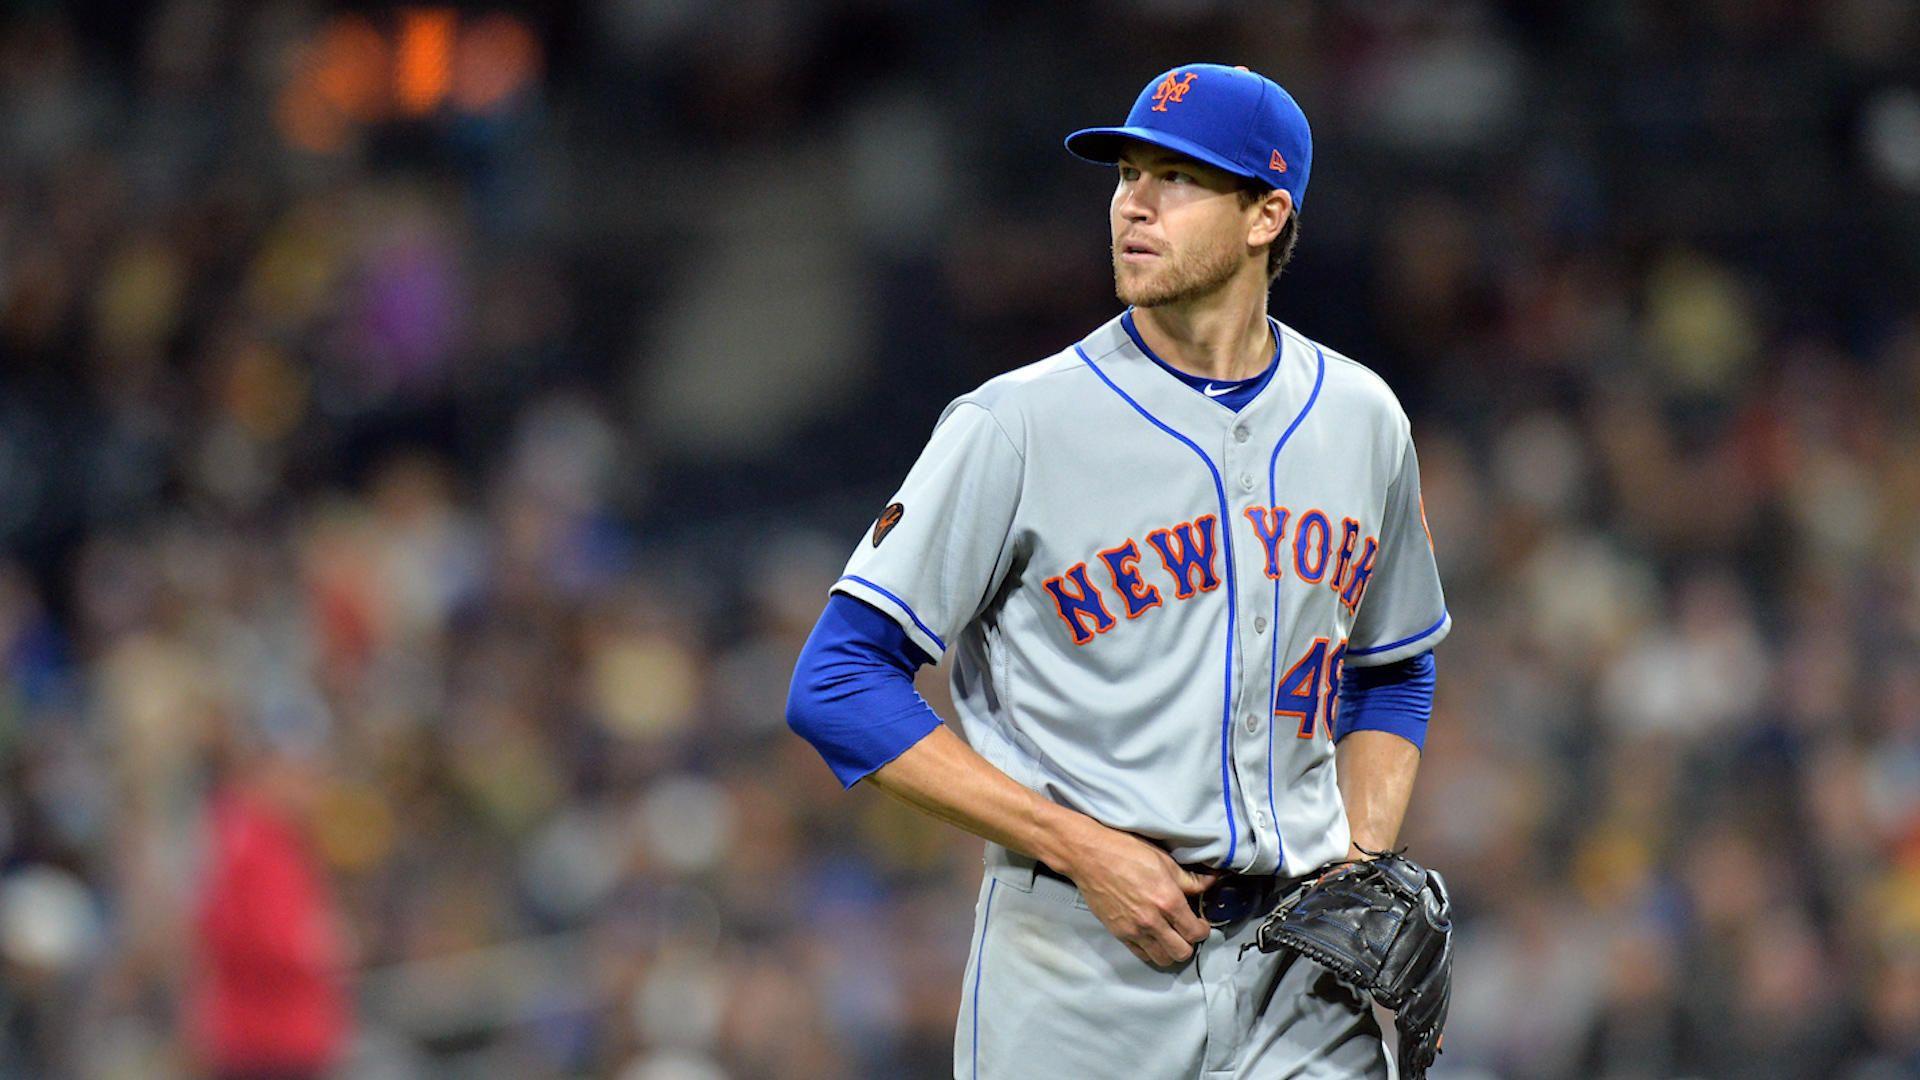 Jacob deGrom leading 1st place Mets